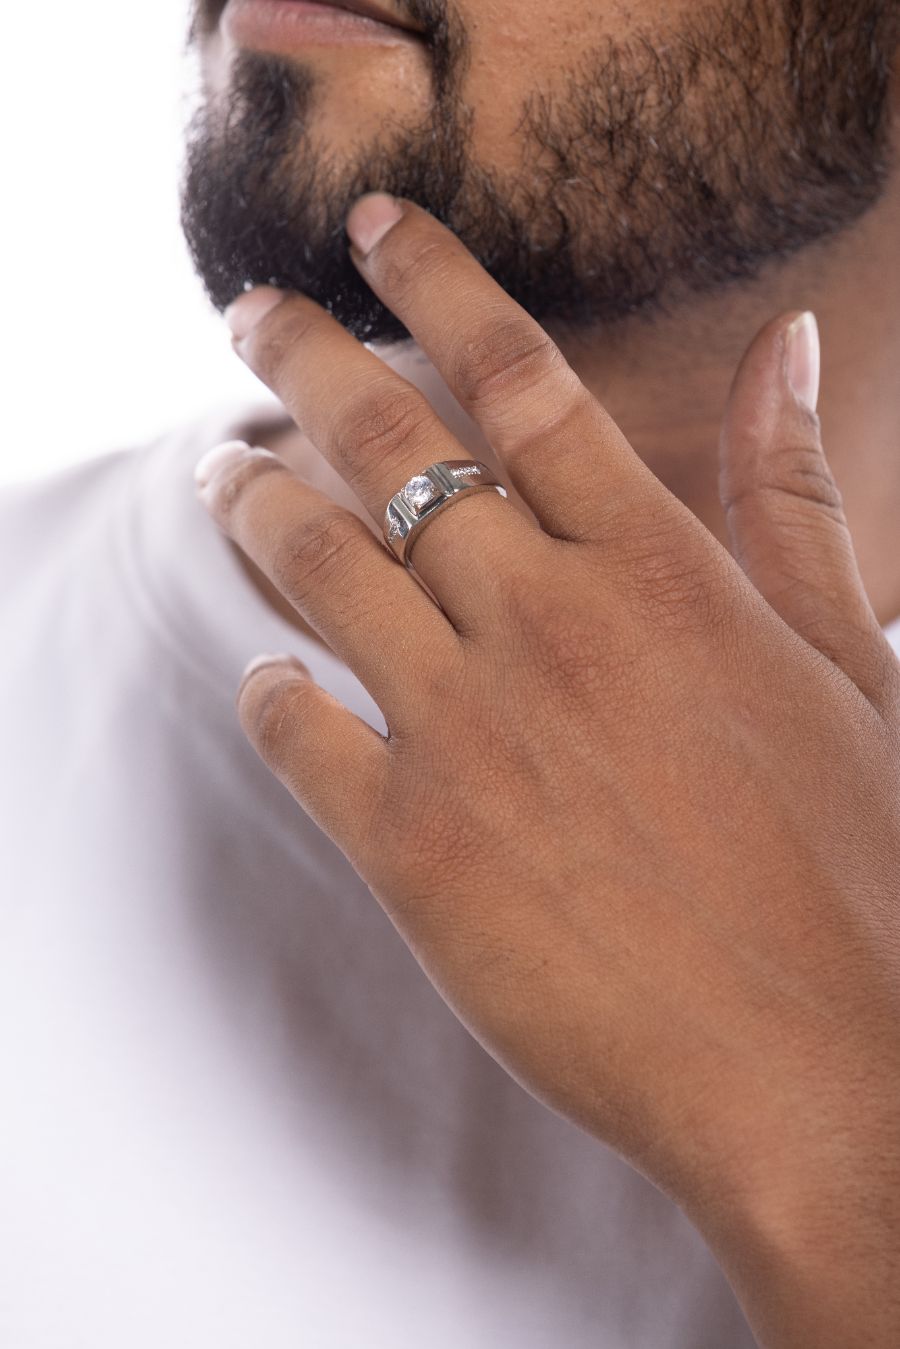 Pin by ╭☆gamze☆╯ on v | Hand with rings men, Hands with rings, Mens rings  fashion